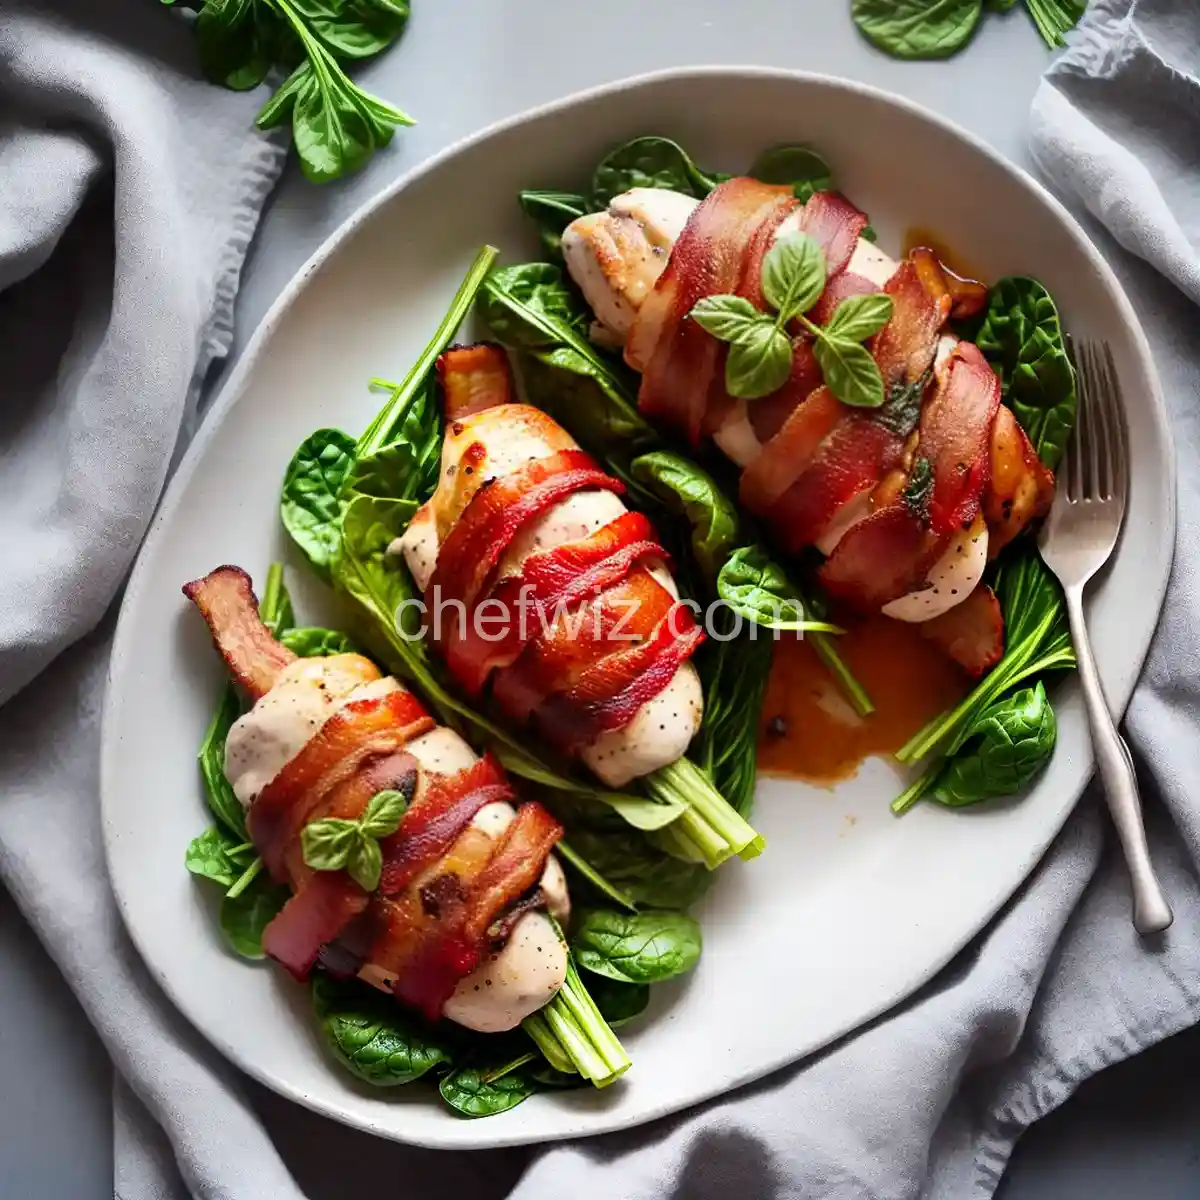 Bacon Wrapped Chicken Stuffed with Spinach and Ricotta compressed image1